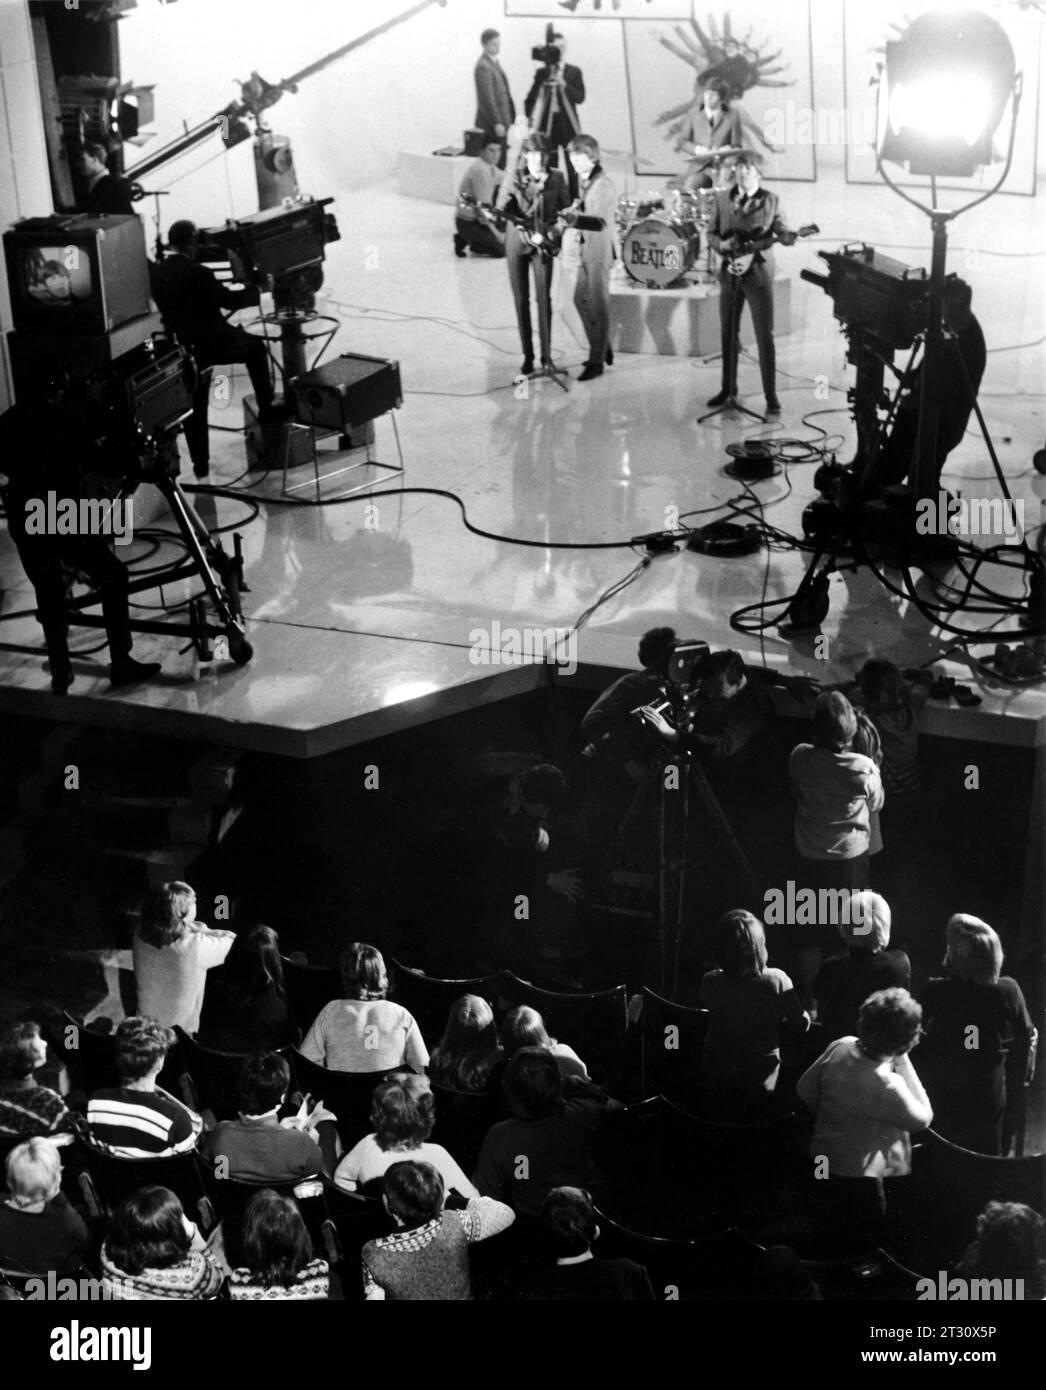 THE BEATLES PAUL McCARTNEY GEORGE HARRISON RINGO STARR and JOHN LENNON on set candid during filming at the Scala Theatre of concert finale scene and audience for A HARD DAY'S NIGHT 1964 director RICHARD LESTER Walter Shenson Films / Proscenium Films / United Artists Stock Photo